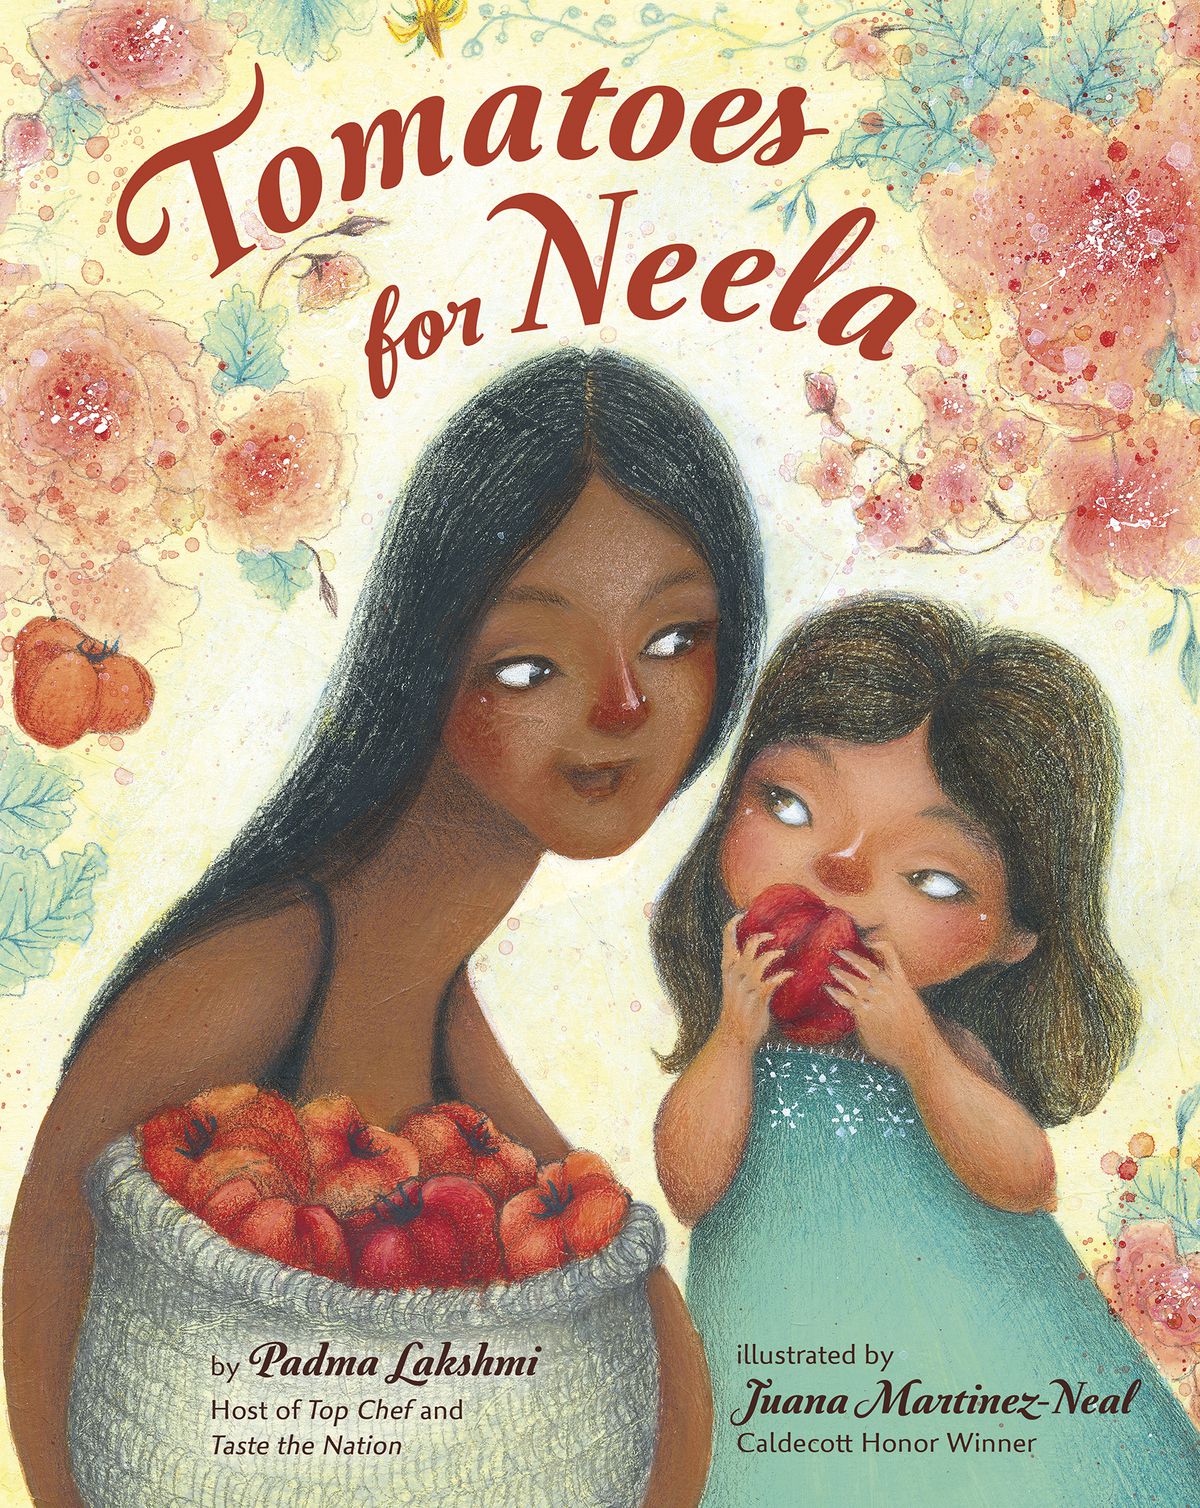 This cover image released by Viking Books for Young Readers shows “Tomatoes for Neela,” a children’s book written by Padma Lakshmi, with illustrations by Juana Martinez-Neal. The book mixes the author’s memories of cooking with her family with practical food advice, a nod to farmworkers and even a pair of recipes.